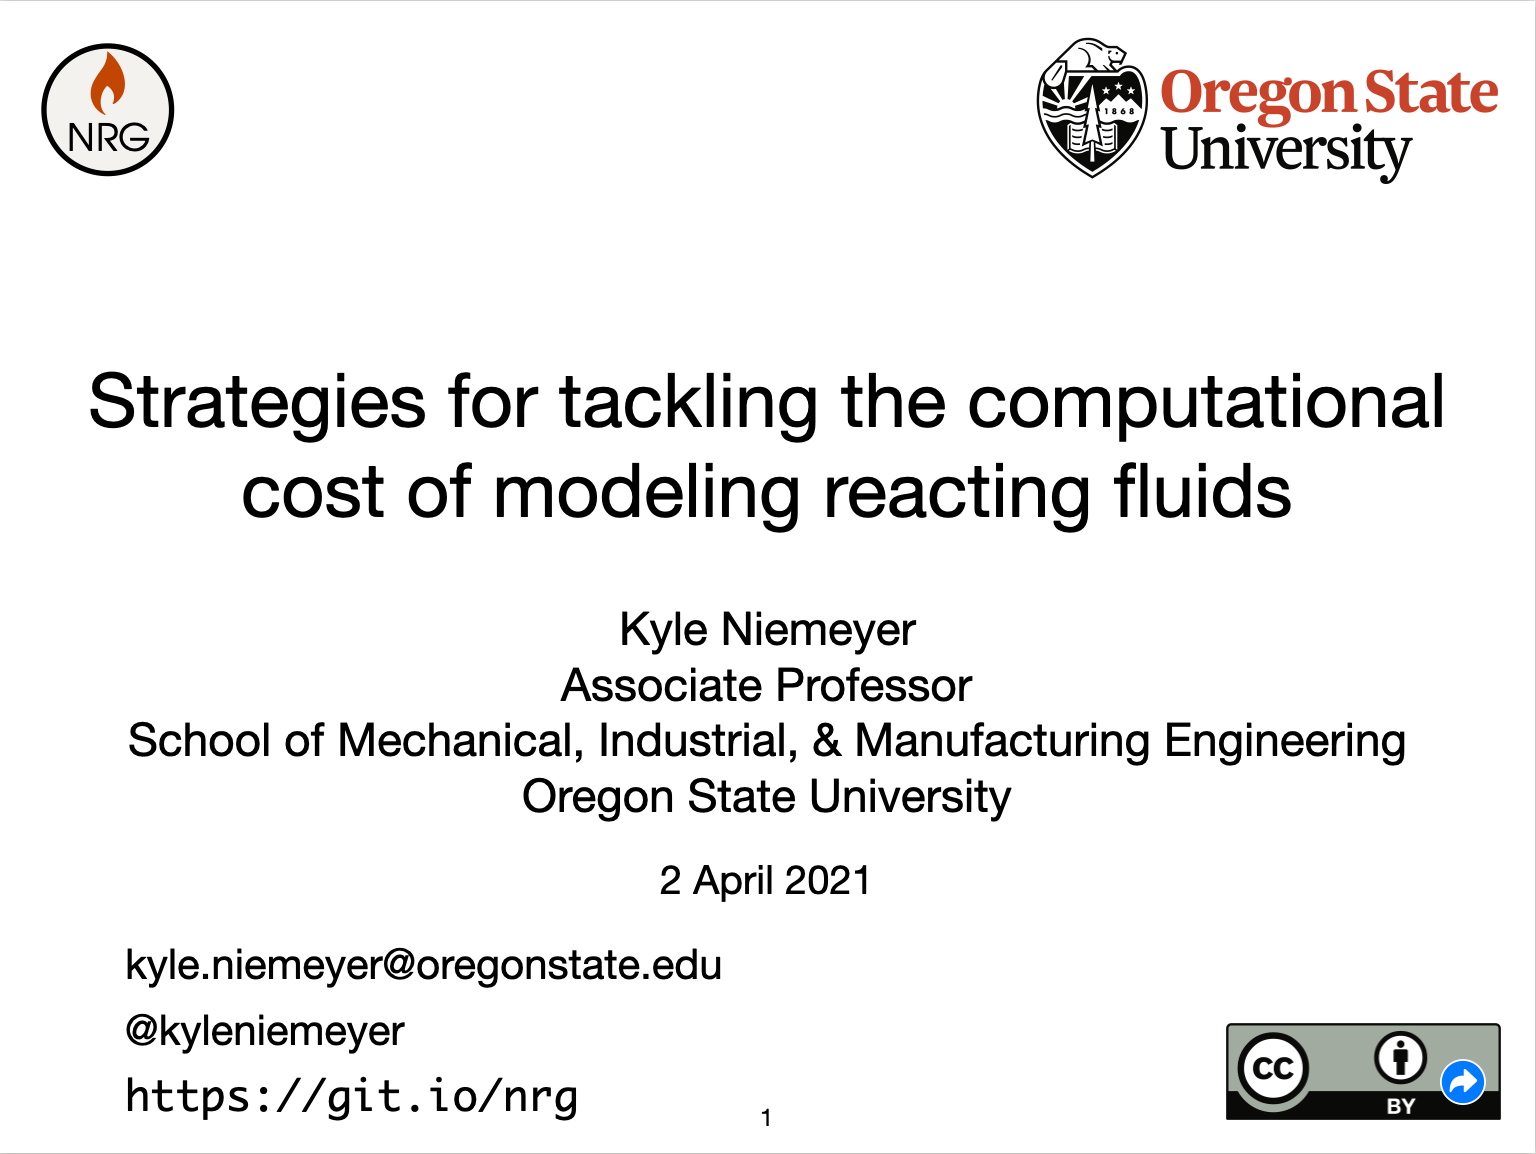 The title slide, which says 'Strategies for tackling the computational cost of modeling reacting fluids'.